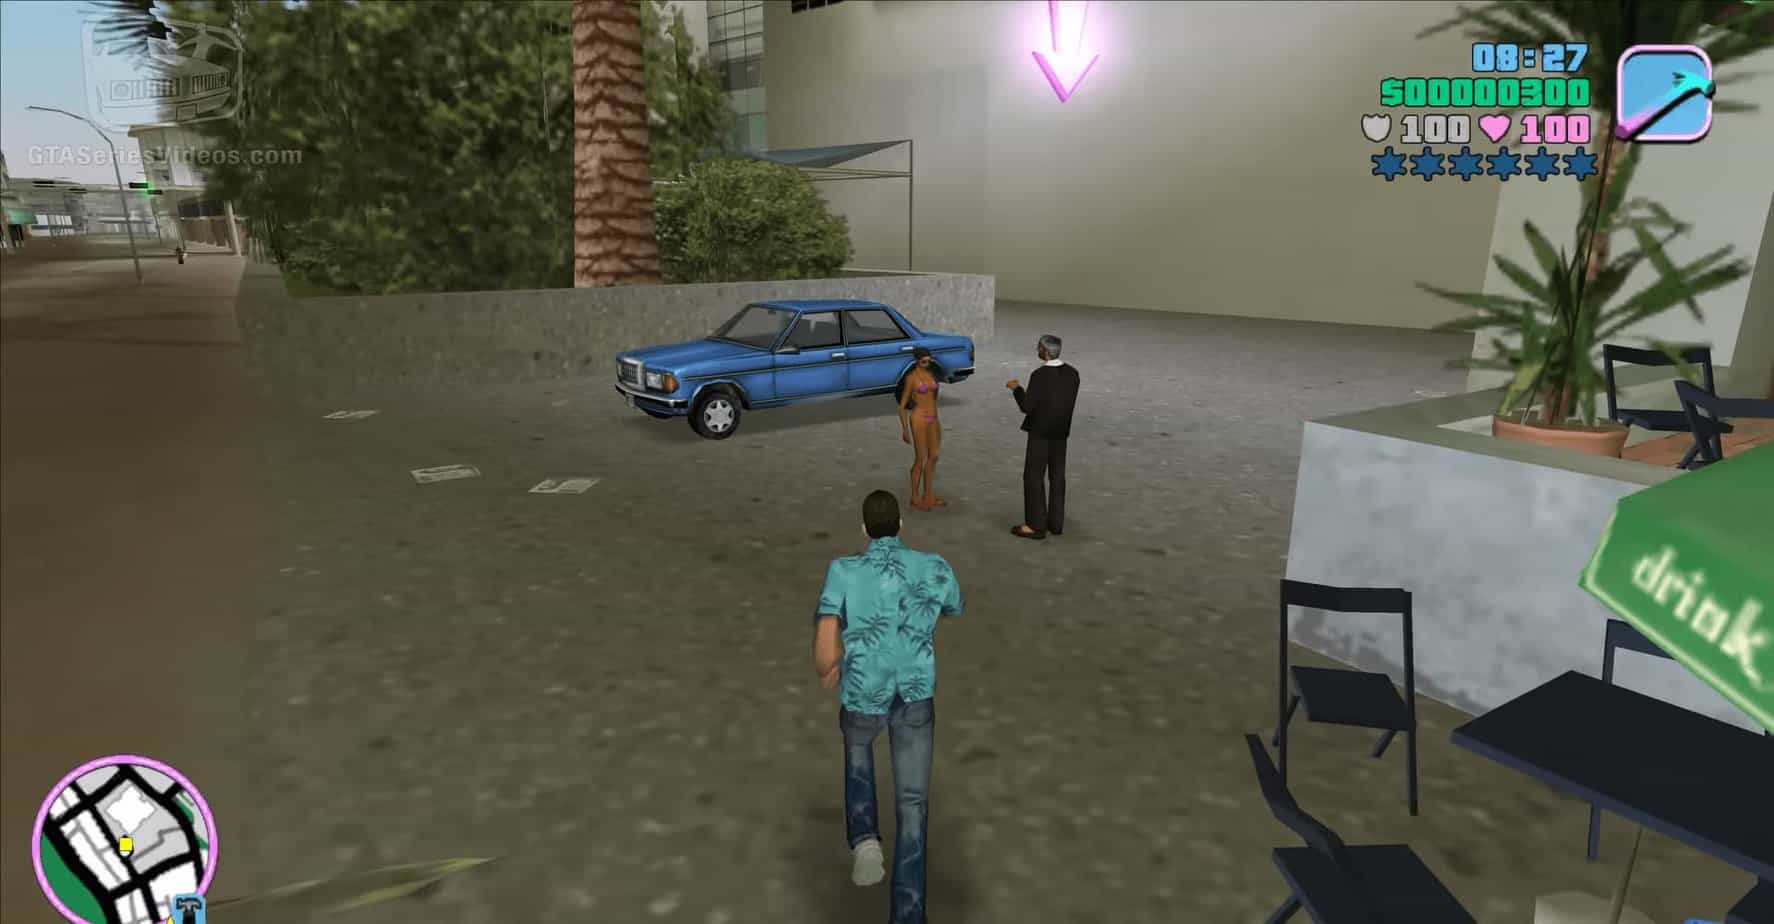 How to deactivate cheats on GTA San Andreas - Quora